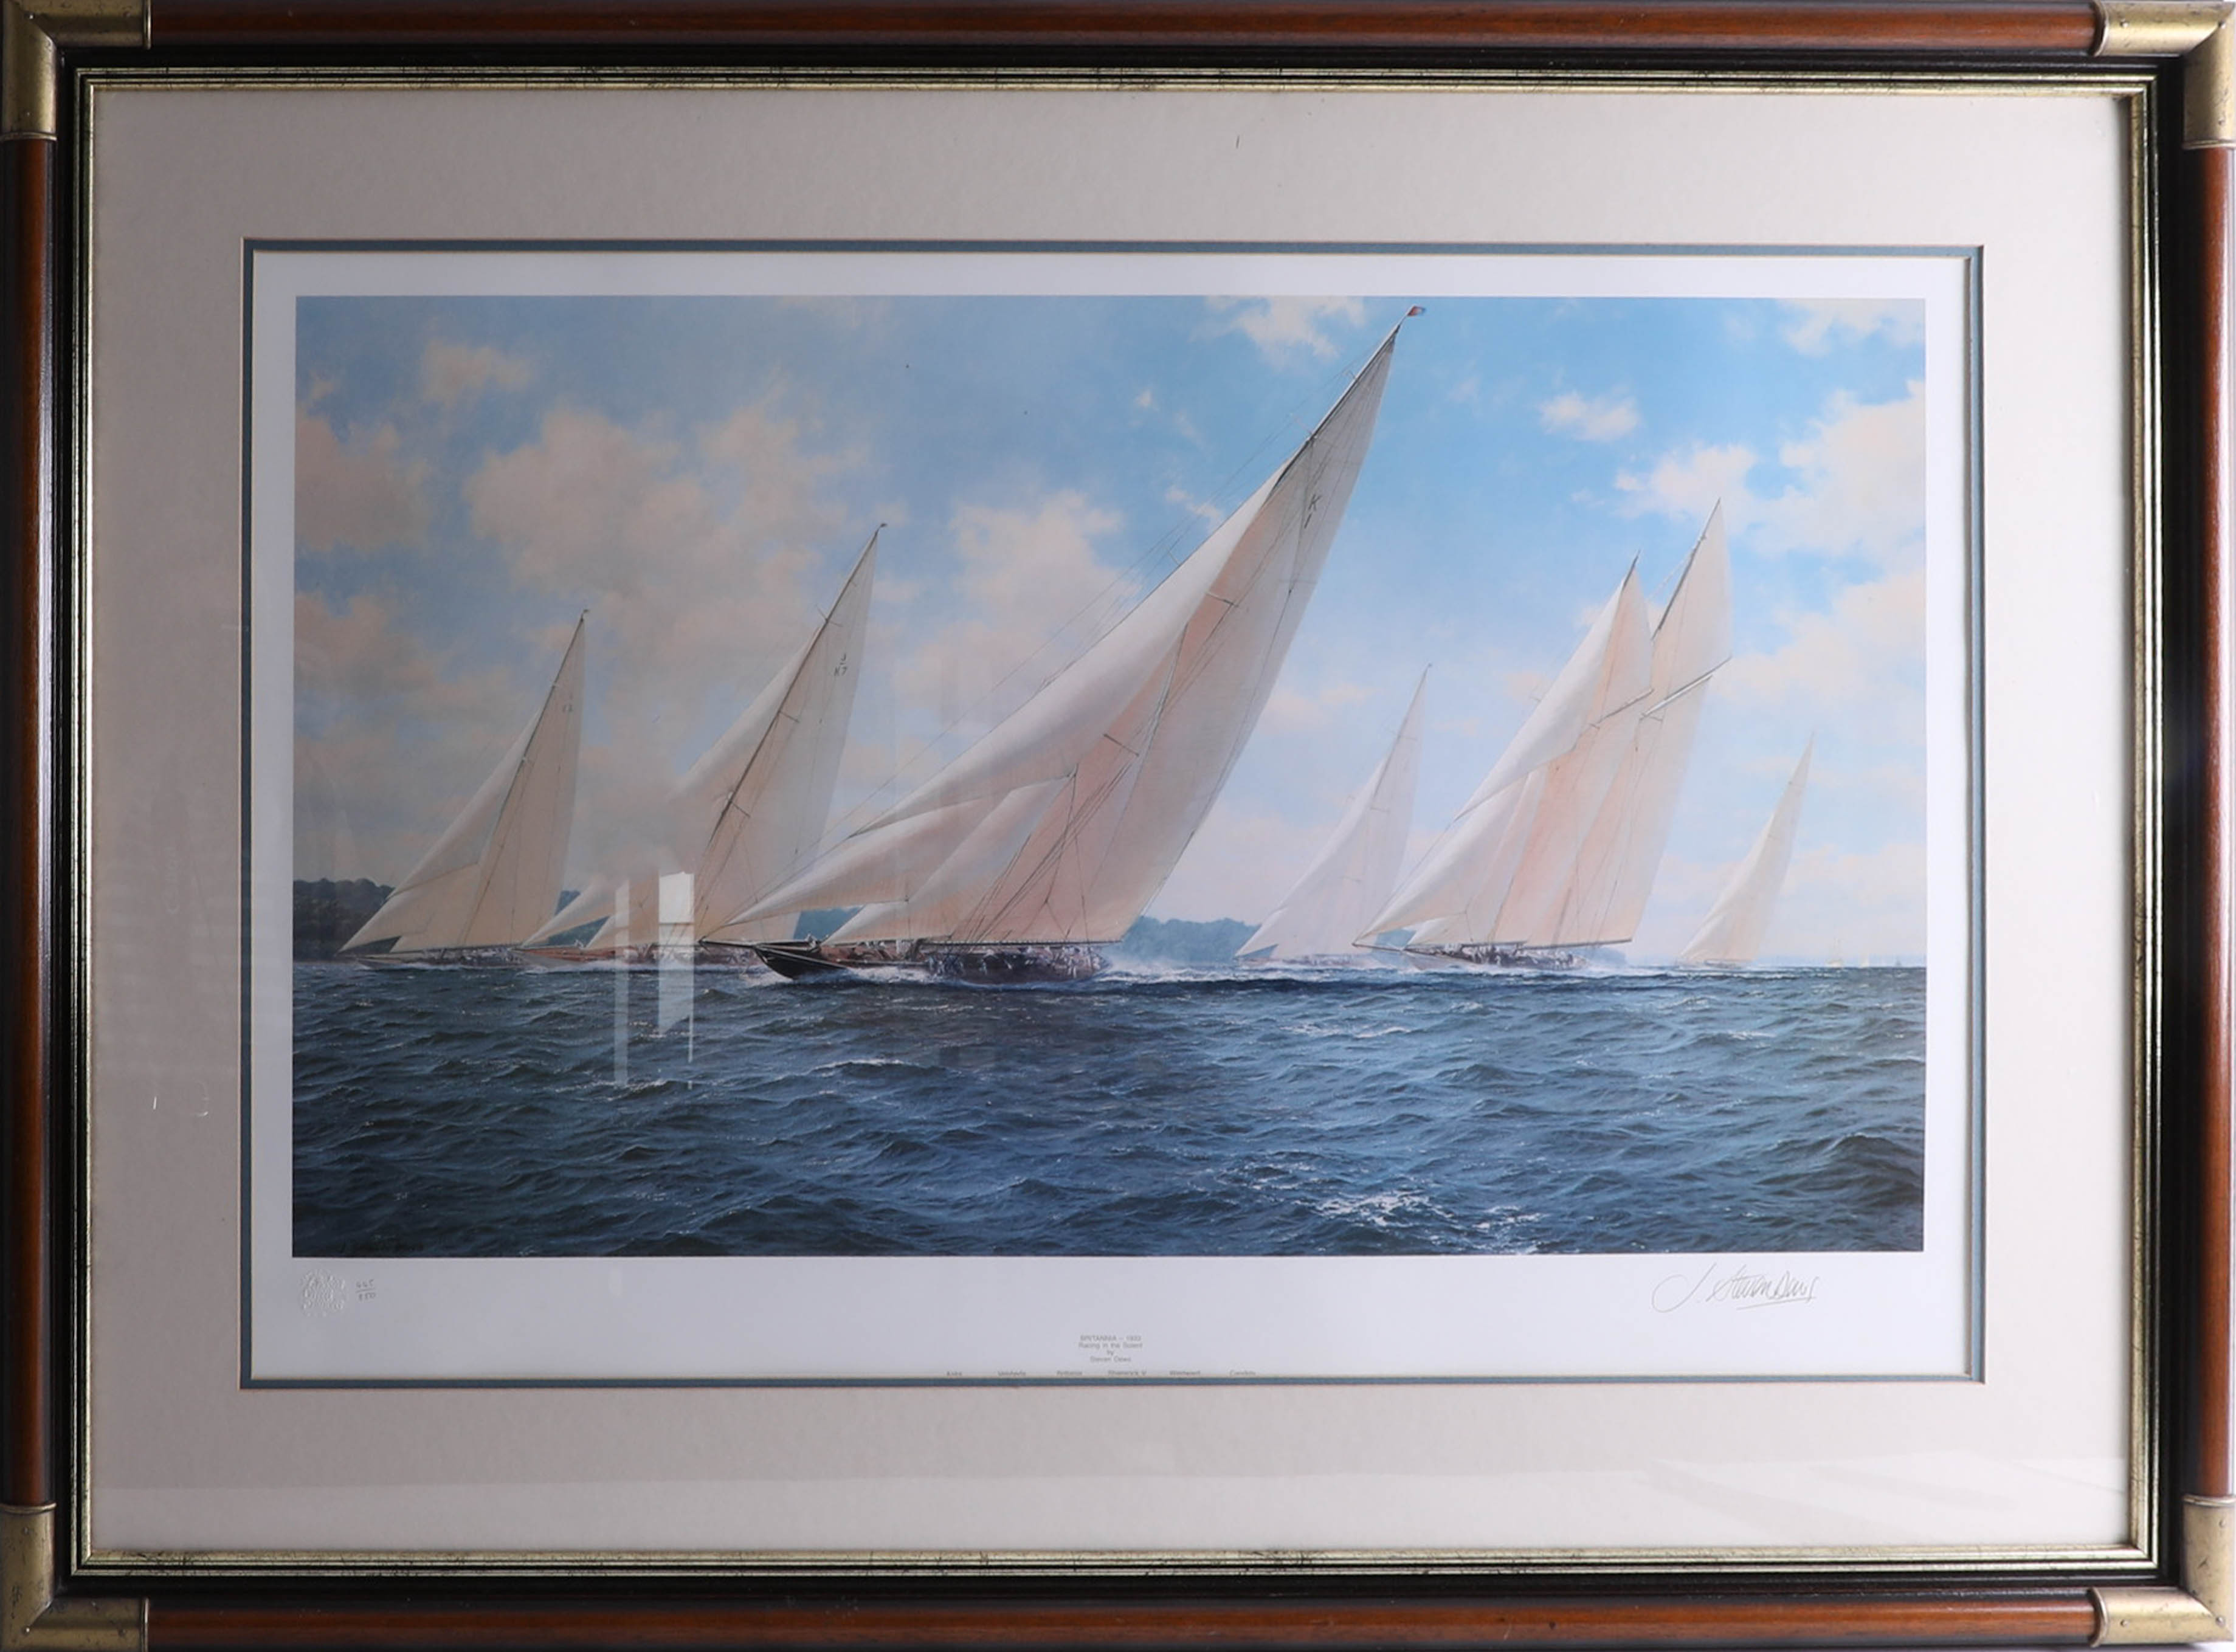 A collection of J.Steven Dews prints including 'Shamrock V racing off Yarmouth', 'The Whaler Phoenix - Image 5 of 5